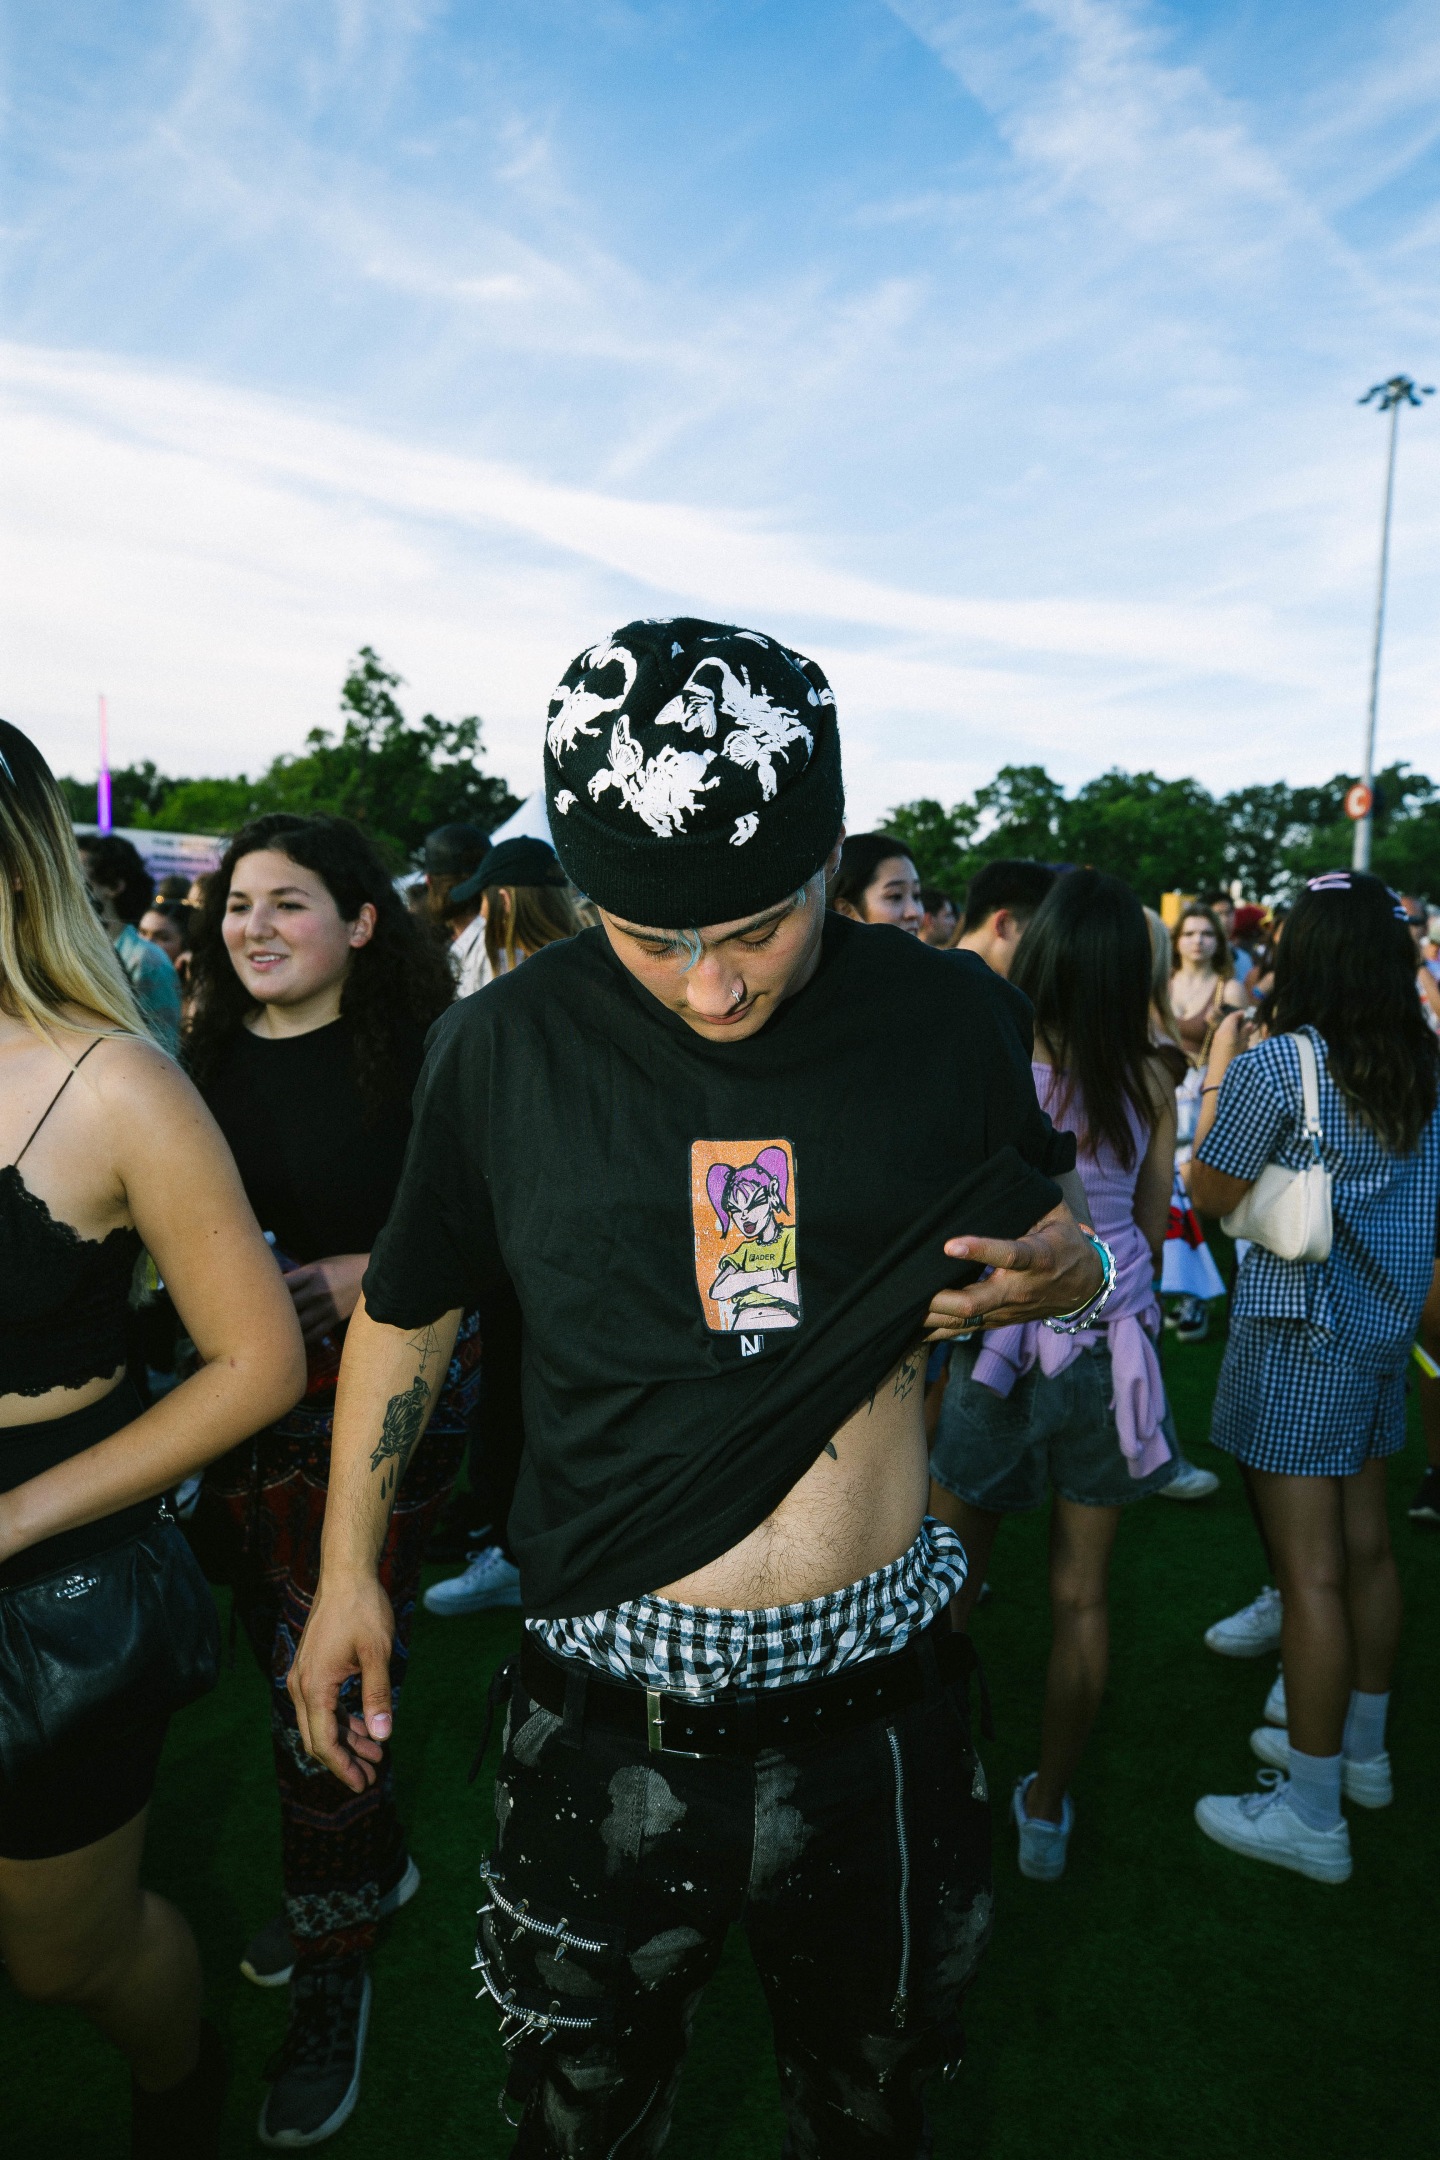 Here are the best looks from the Governors Ball 2021